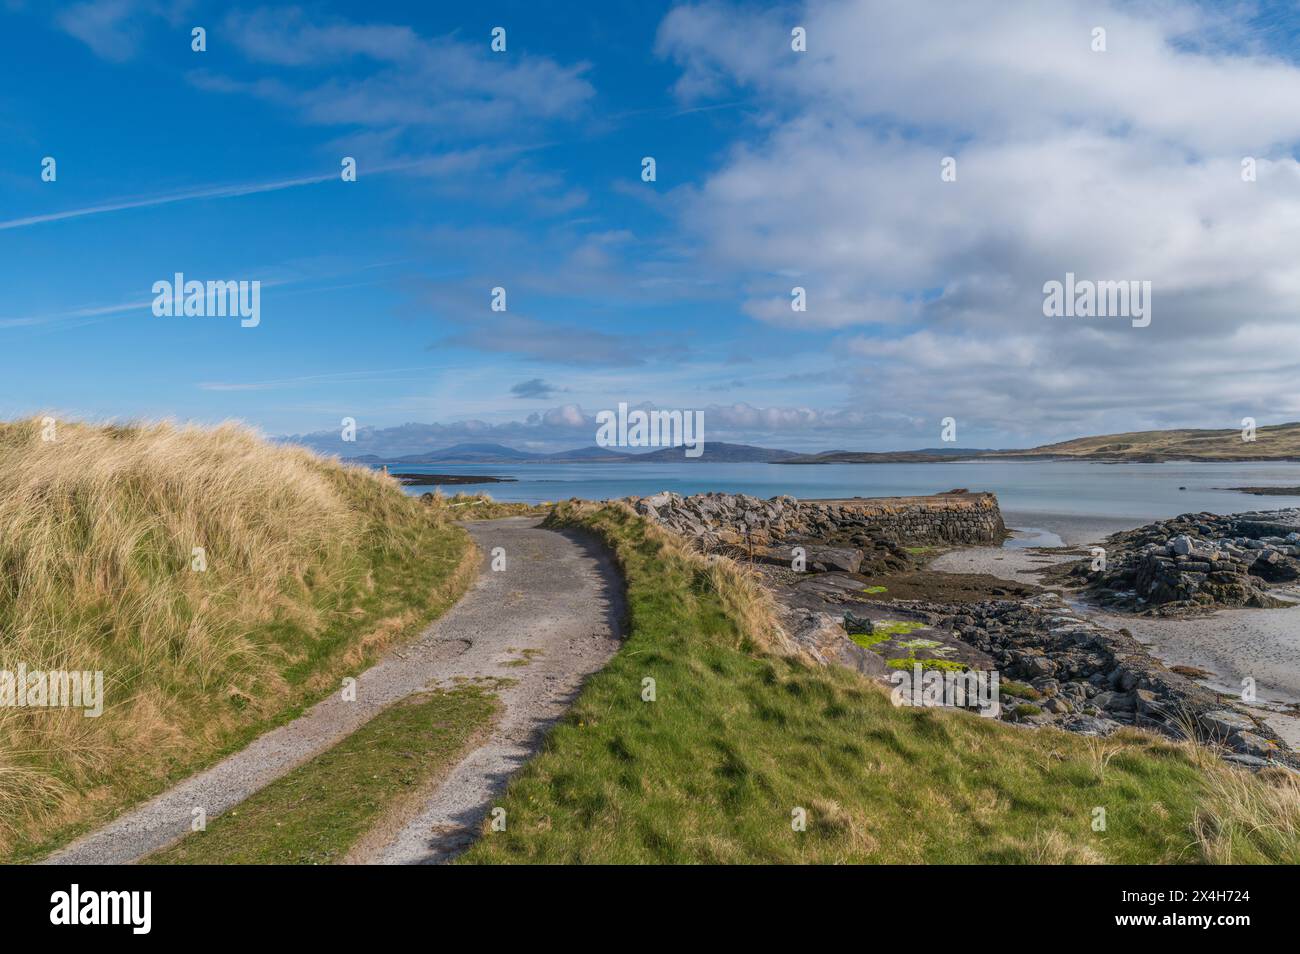 Eoligarry Harbour and Jetty, The Isle of Barra, Scotland Stock Photo